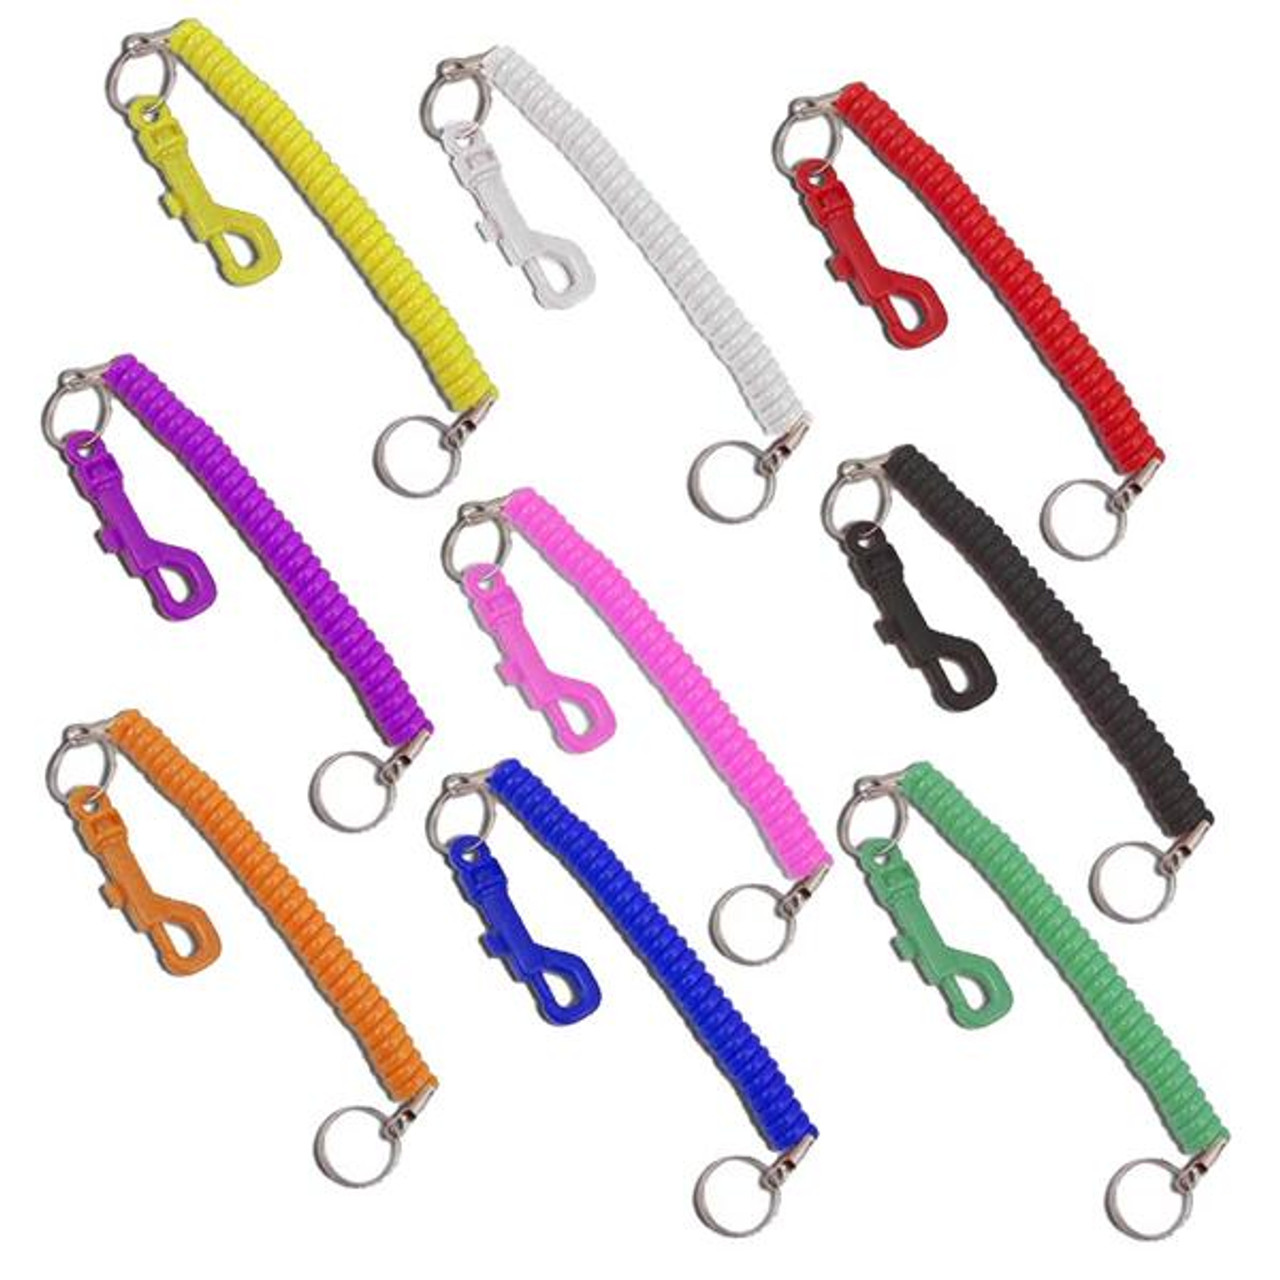 Shop for and Buy Plastic Snap Clip with Extendable Coil at .  Large selection and bulk discounts available.